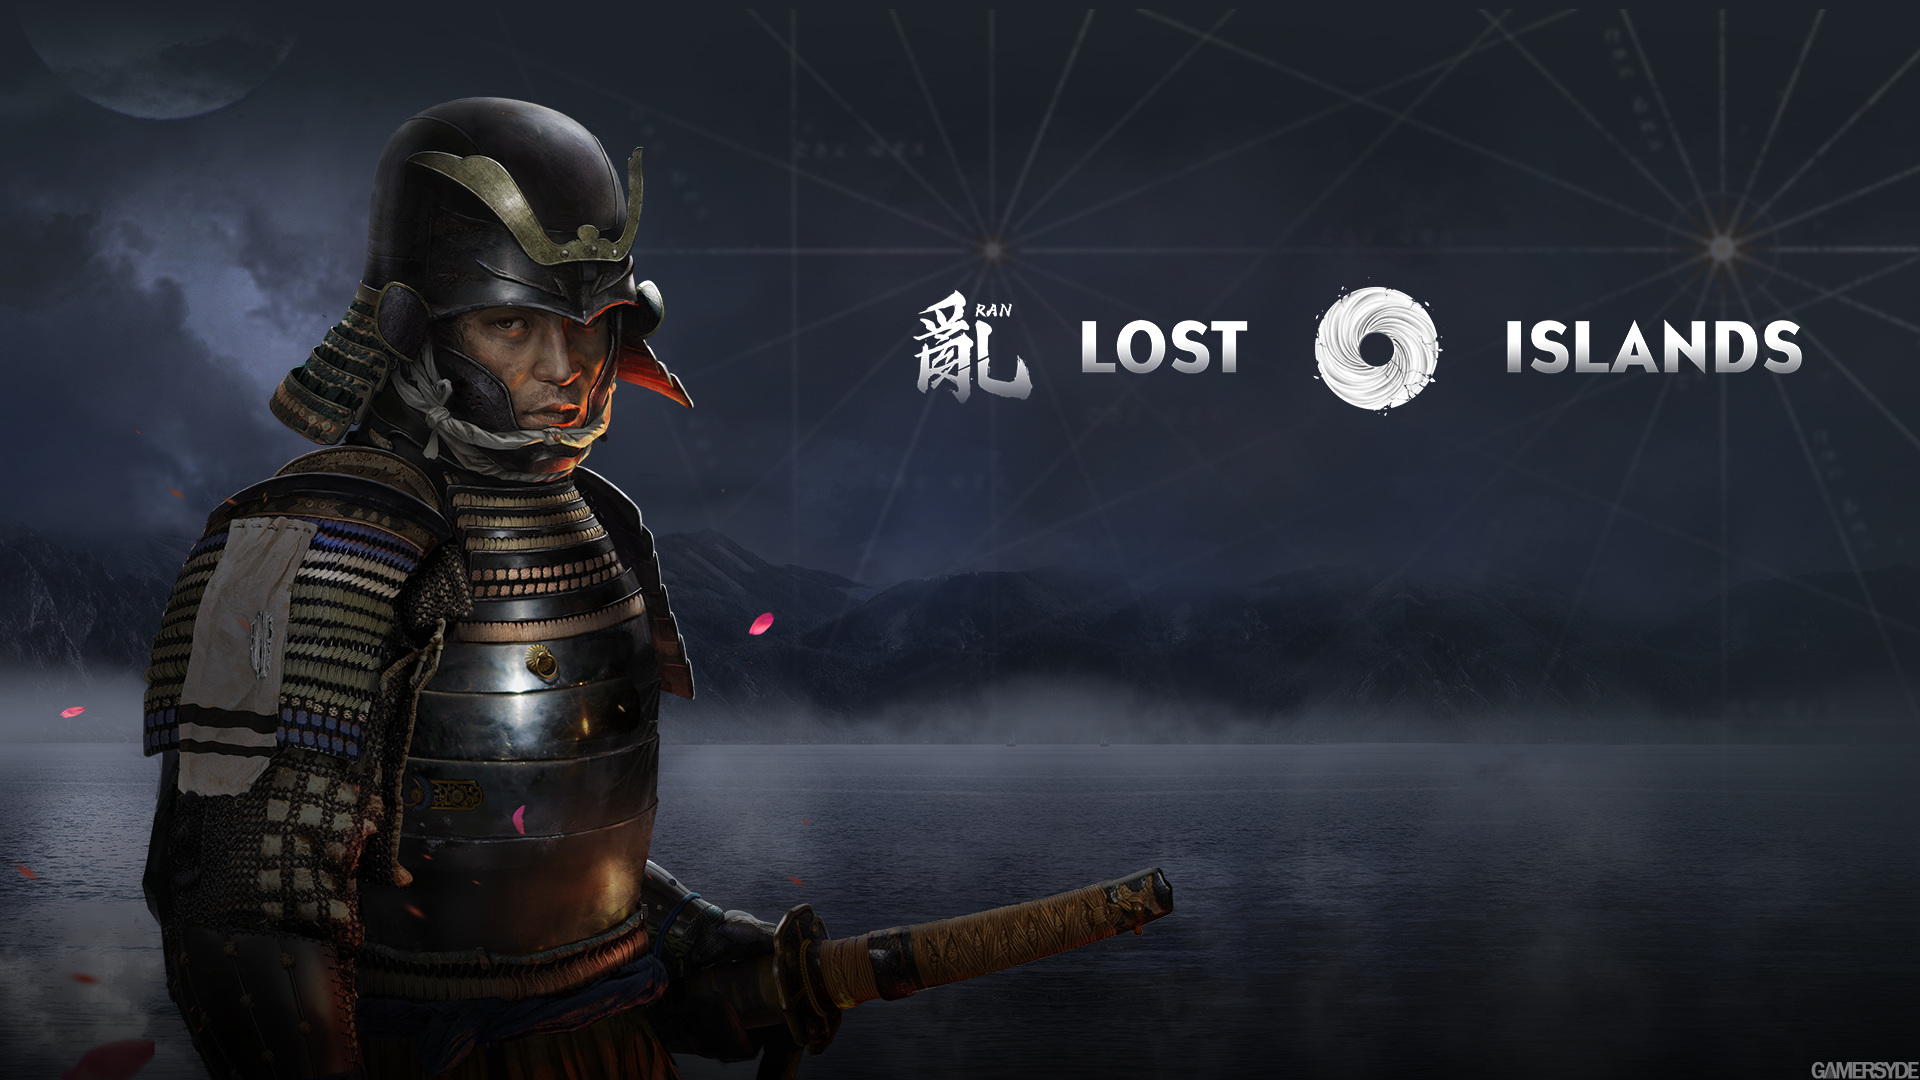 New Trailer  RAN: Lost Islands brings Melee Battle Royale action to Steam  Game Festival – Drop The Spotlight